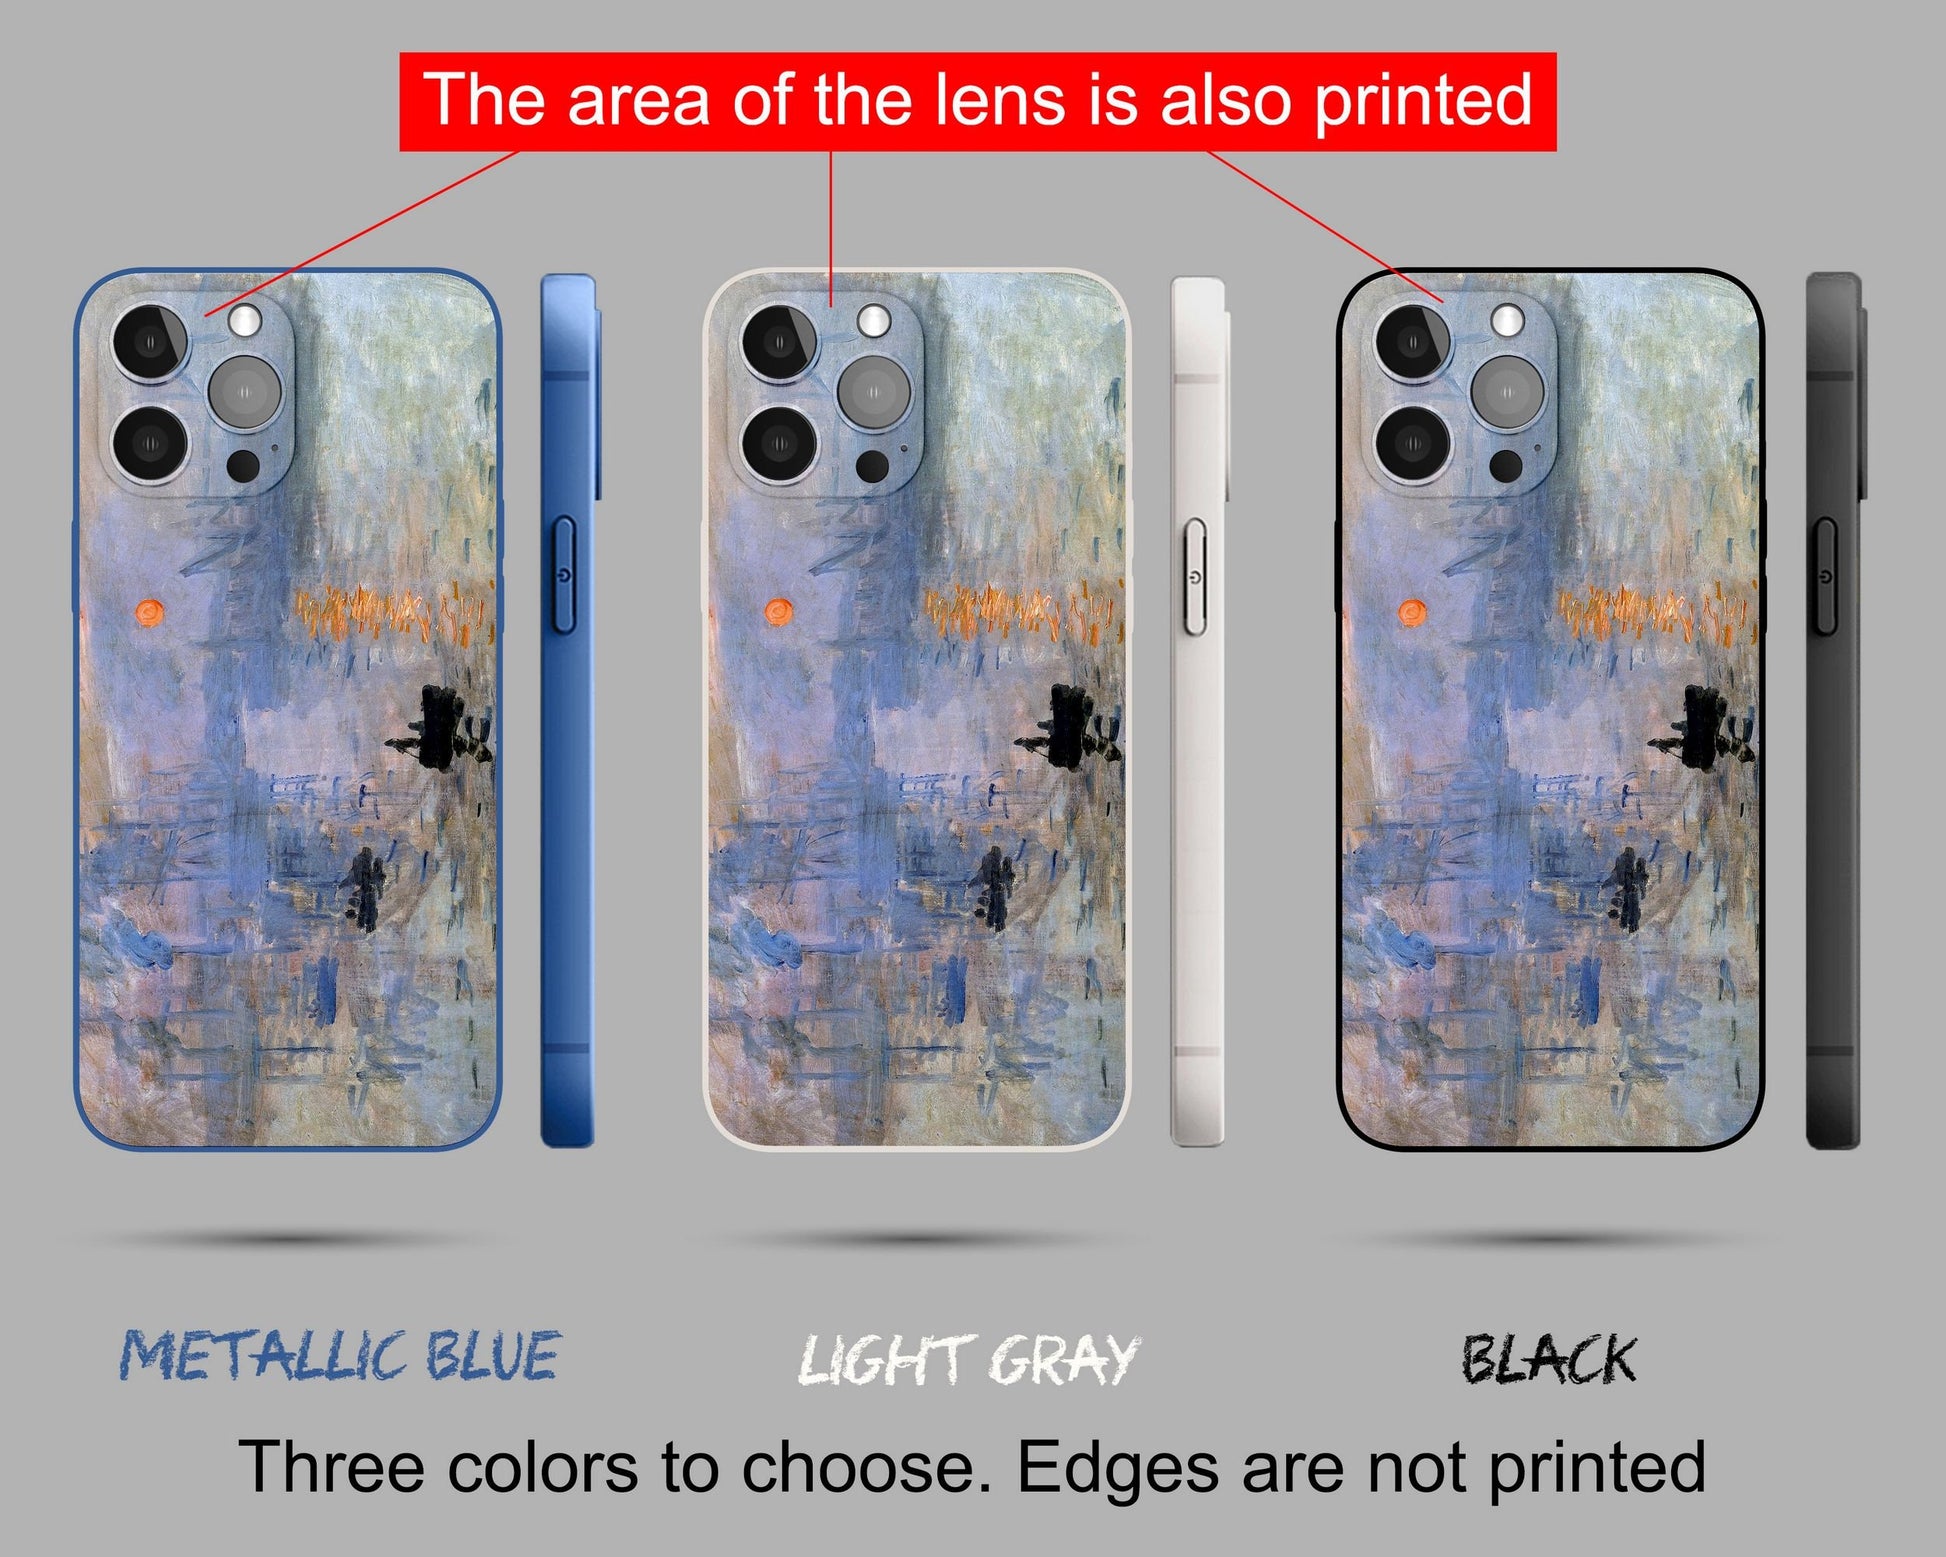 Claude Monet Paintings Iphone 14 Pro Max Case, Iphone 11 Case, Iphone Xs, Iphone 8 Plus Case Art, Aesthetic Iphone, Iphone Protective Case